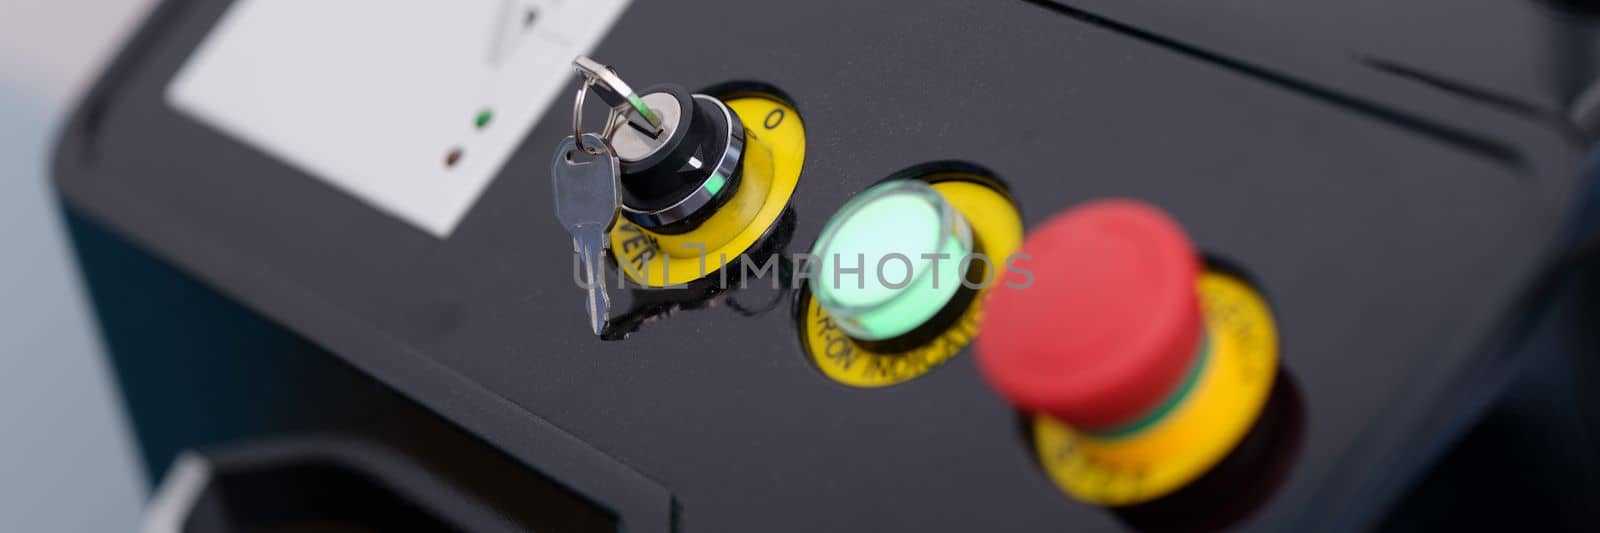 Buttons with key on laser hair removal and blood vessel and acne treatment machine closeup Skin care and rejuvenation equipment